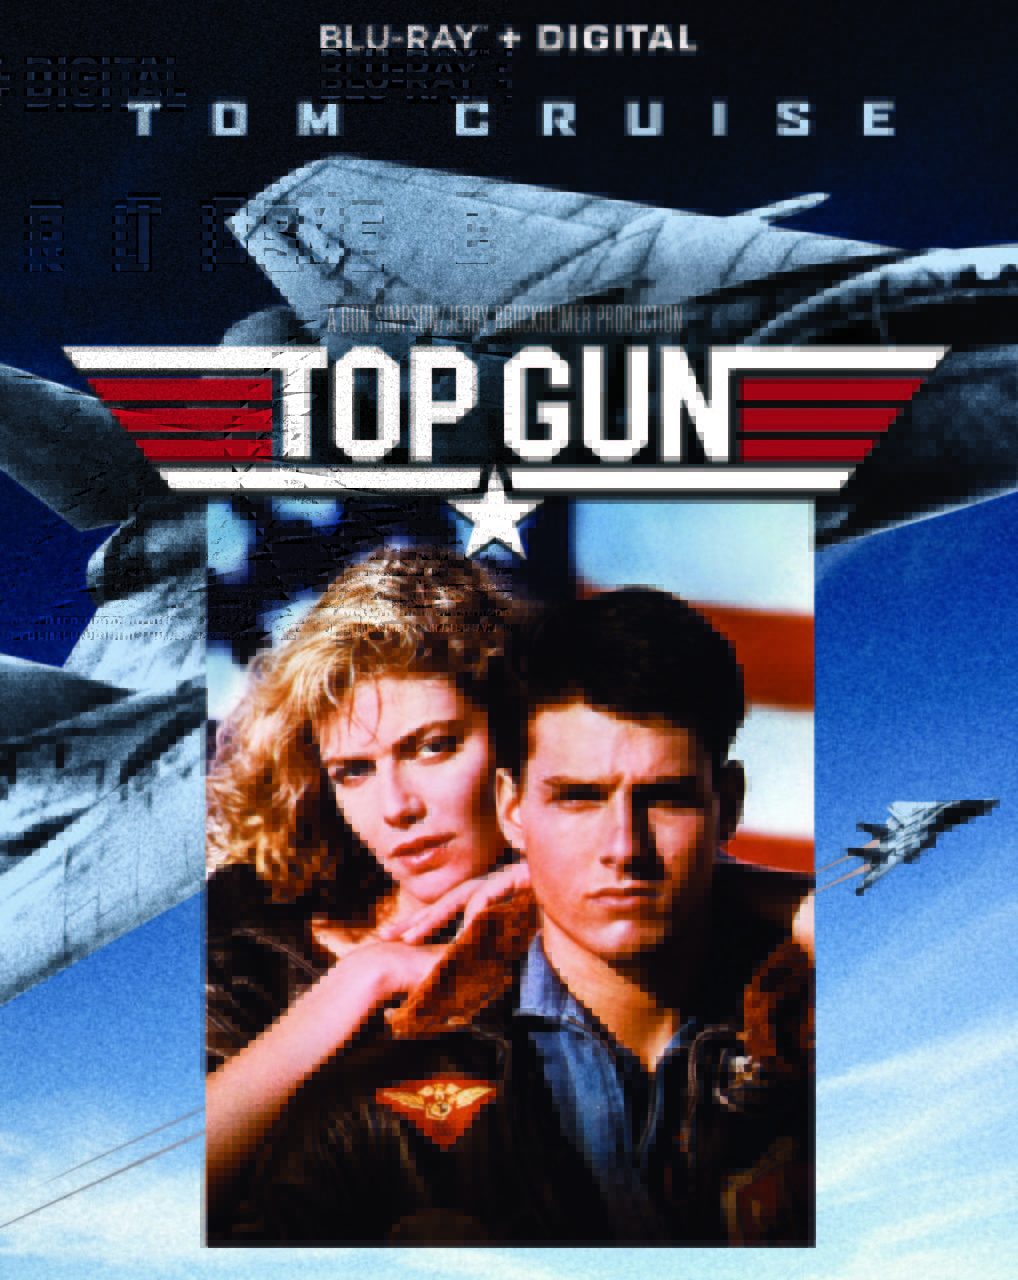 Top Gun Blu-Ray Combo Pack cover (Paramount Home Entertainment)